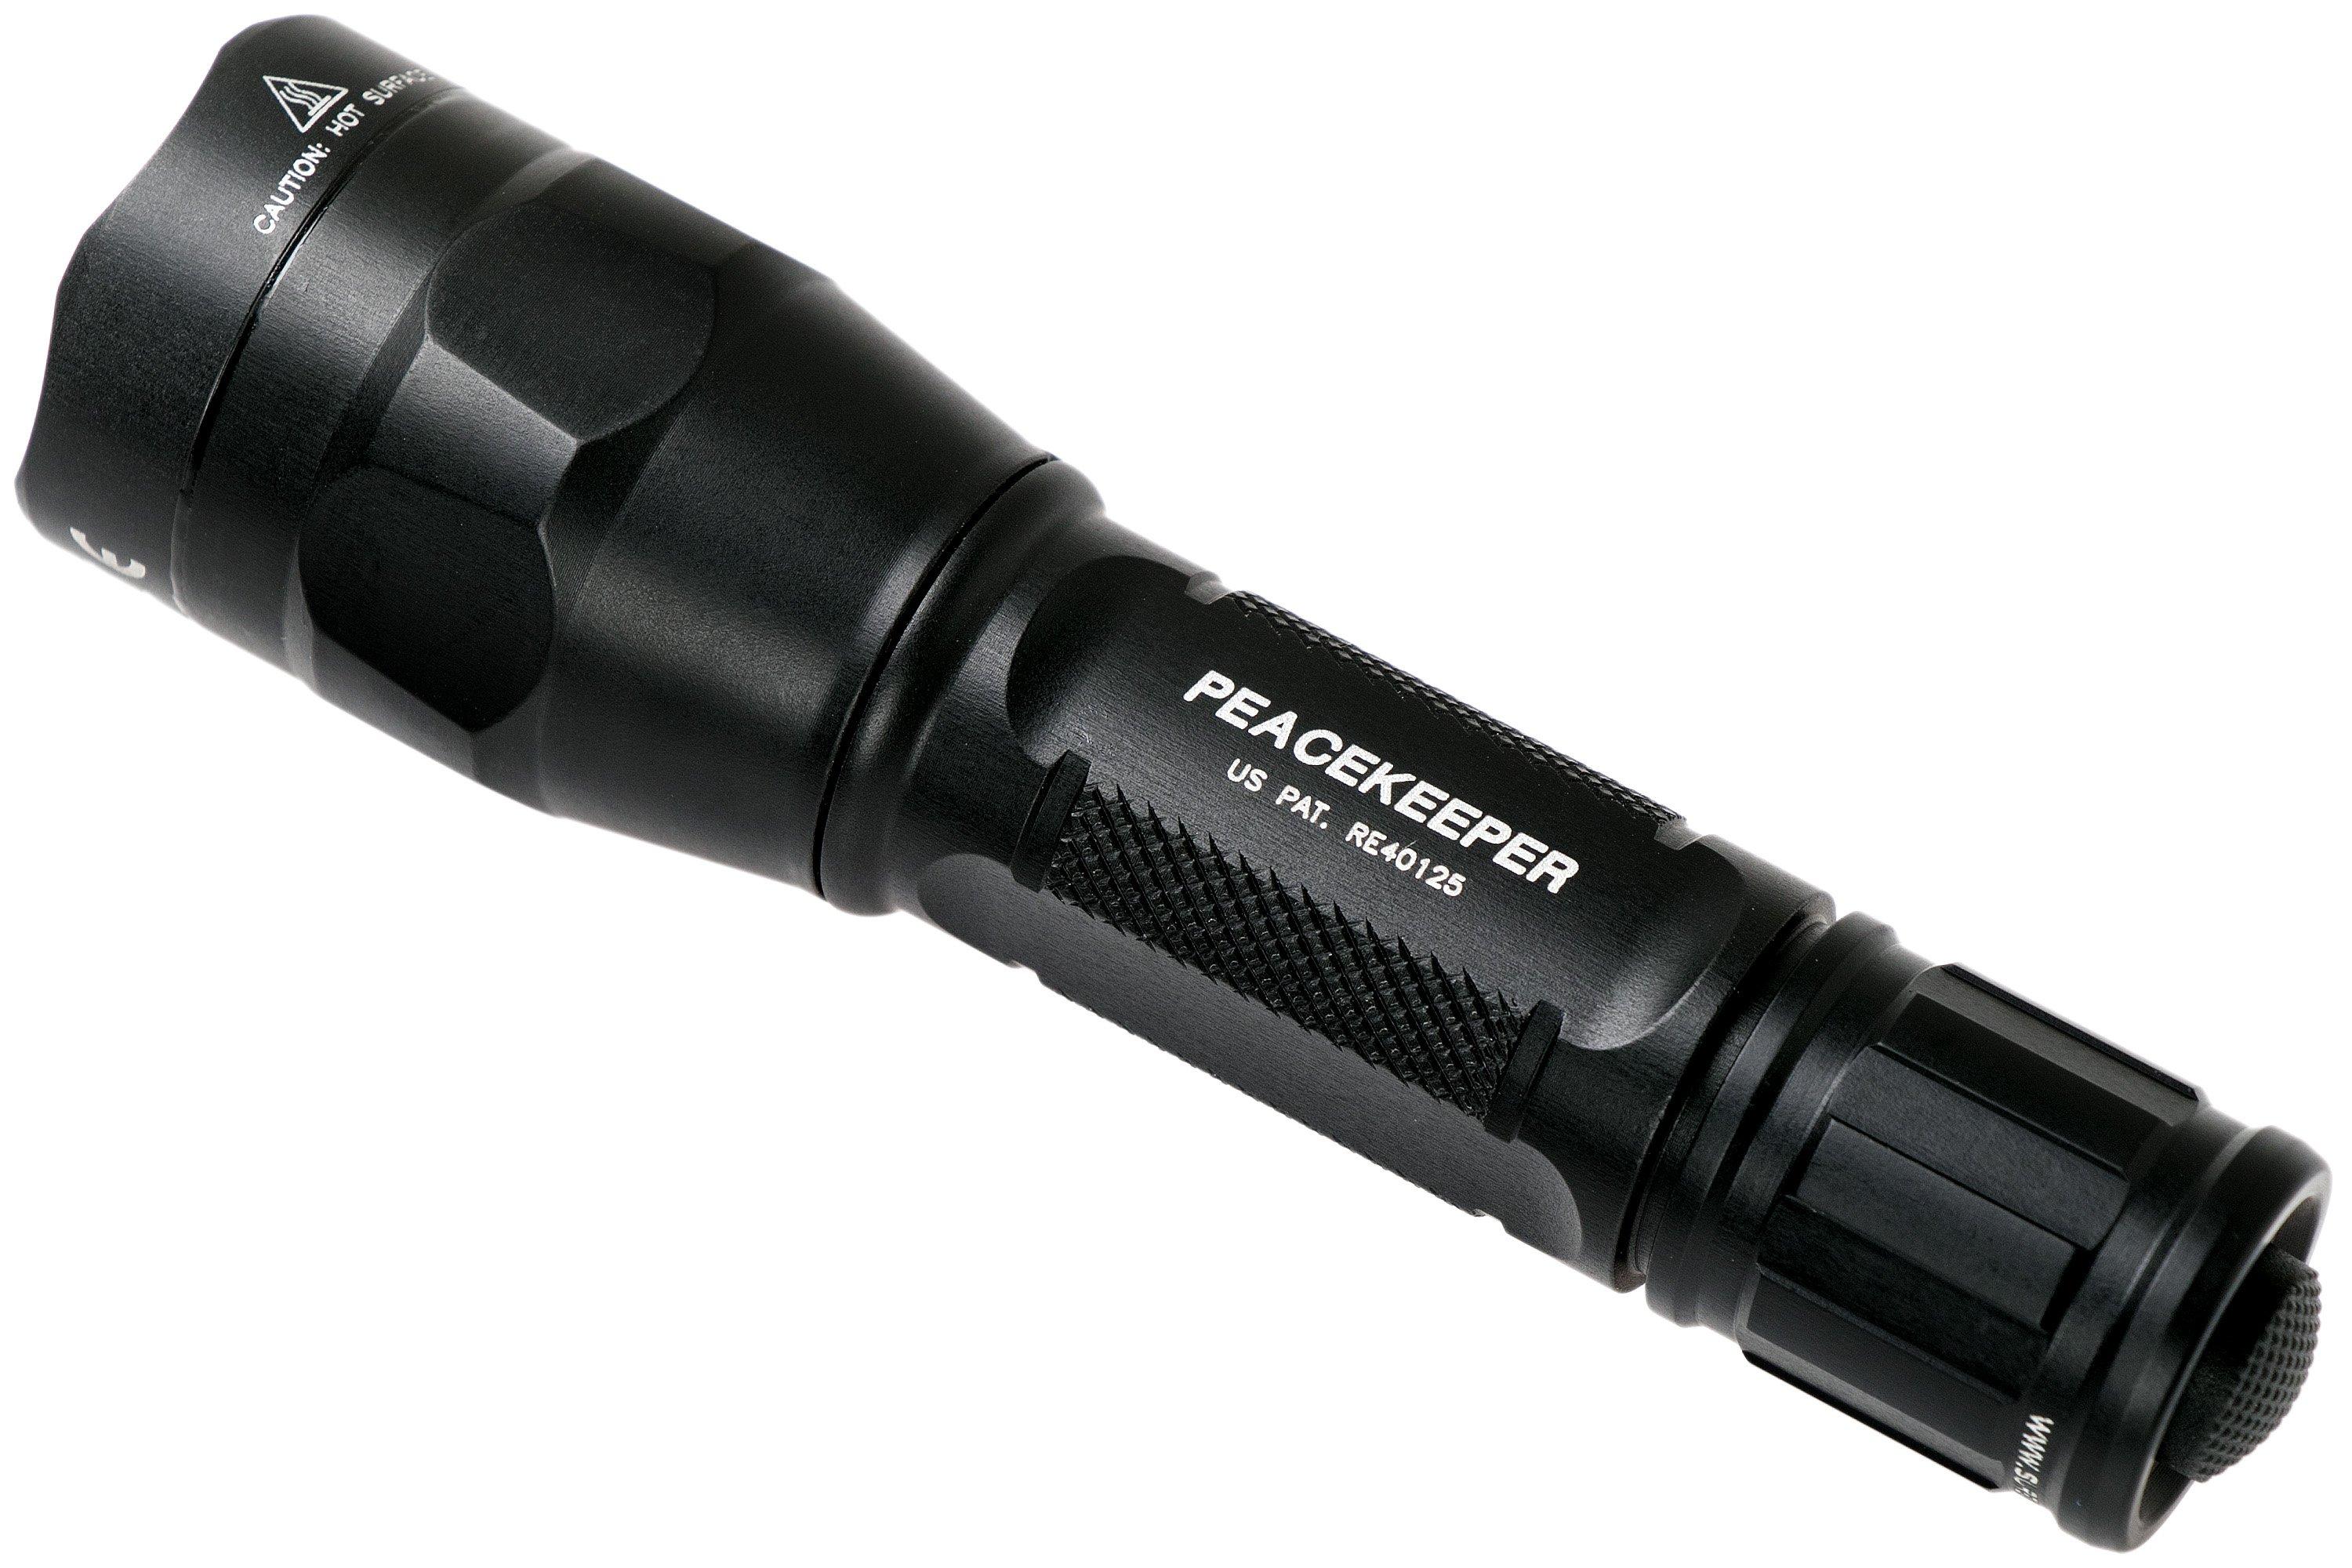 SureFire P1R Peacekeeper rechargeable ultra-high dual-output LED ...